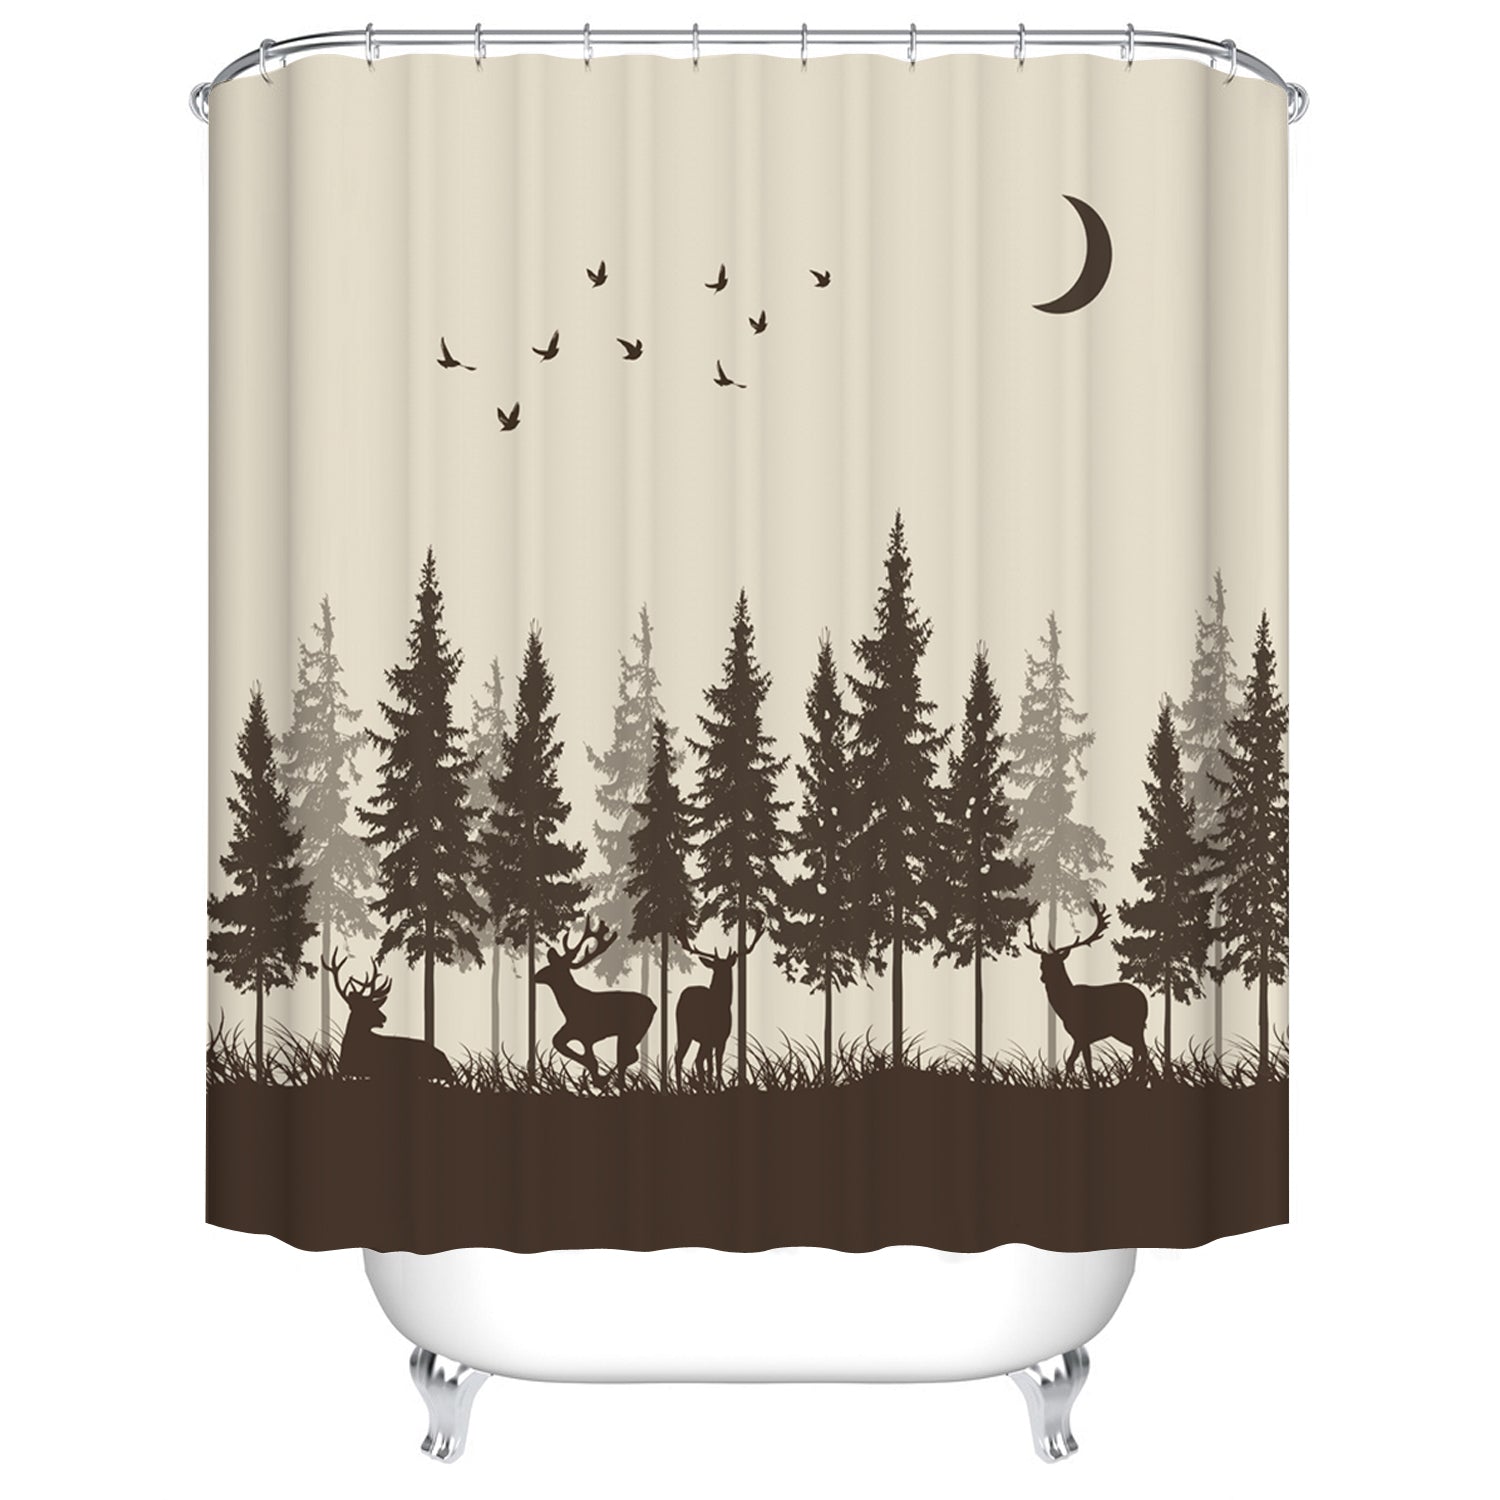 Silhouette of Forest Tree with Family Deer Shower Curtain